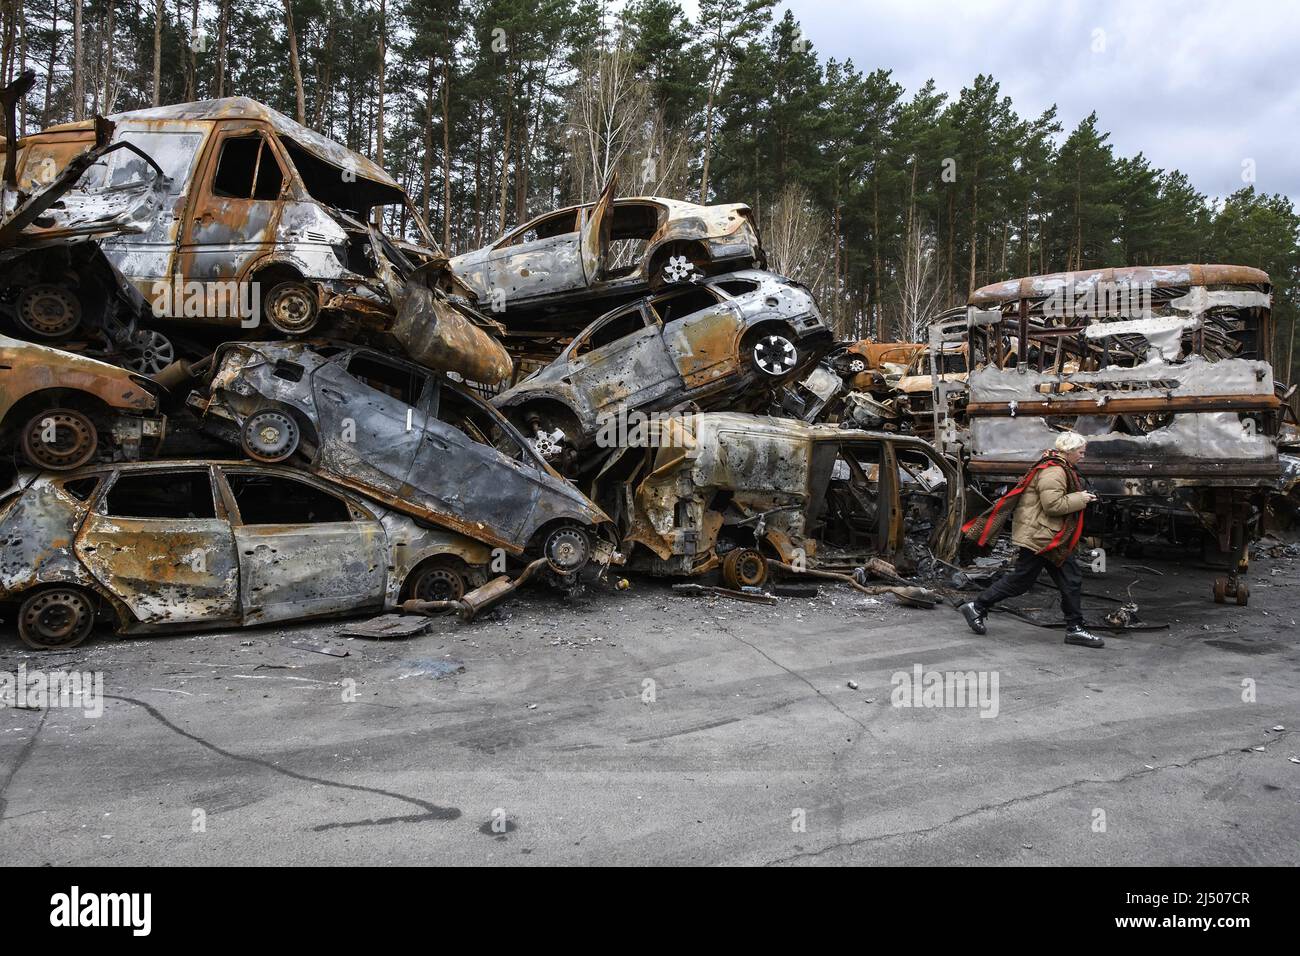 A Ukrainian woman walks beside cars destroyed during the ongoing Russian invasion of Ukraine, at a junkyard in Irpin, Ukraine on Monday, April 18 2022. Russian troops entered Ukrainian territory resulting in fighting and destruction in the country, a huge flow of refugees, and multiple sanctions against Russia. Photo by Vladyslav Musiienko/UPI Credit: UPI/Alamy Live News Stock Photo